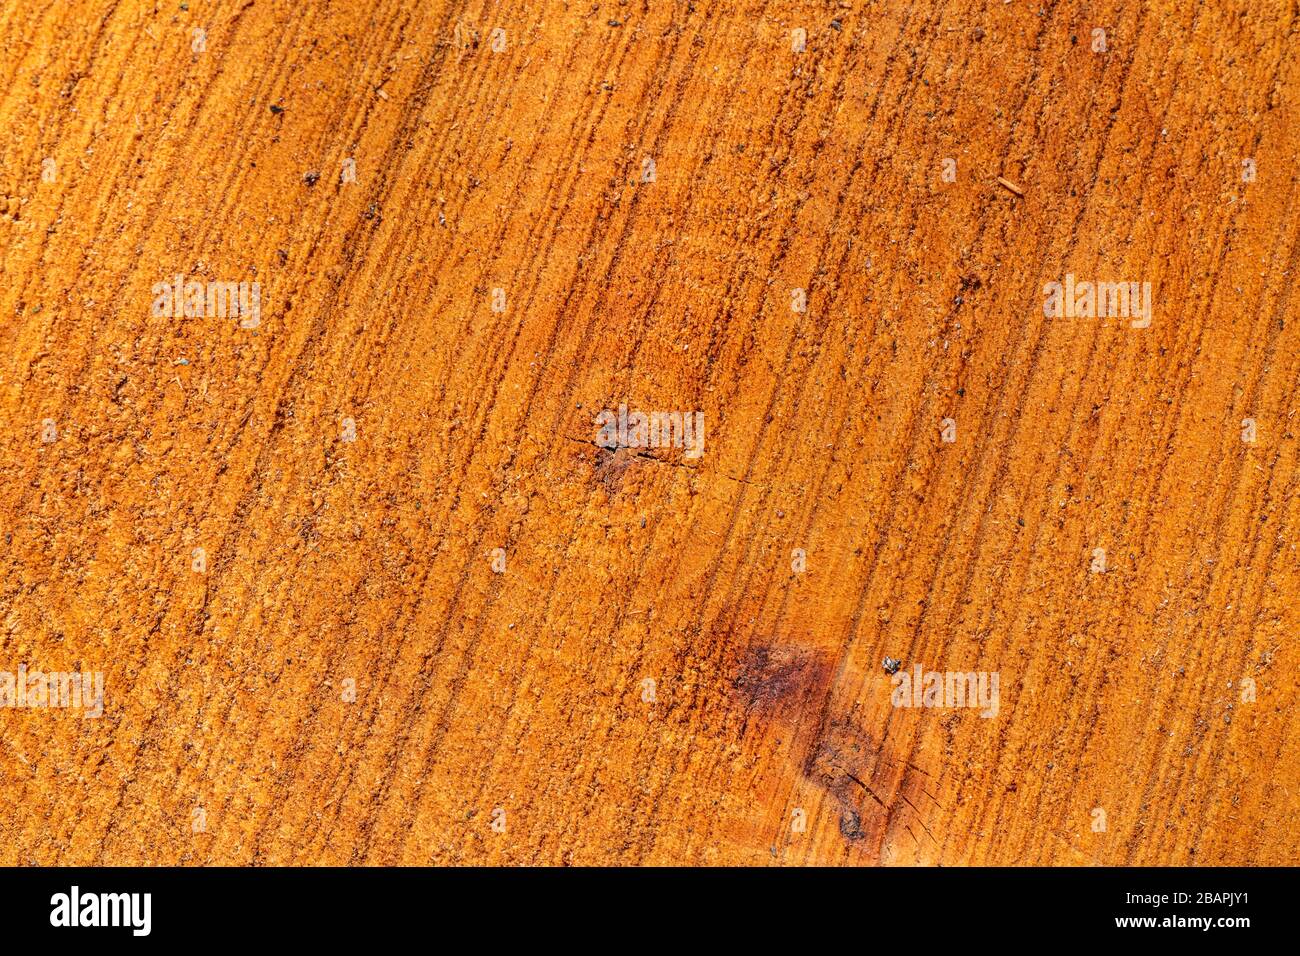 wood cut on red hard wood with annual rings, texture Stock Photo